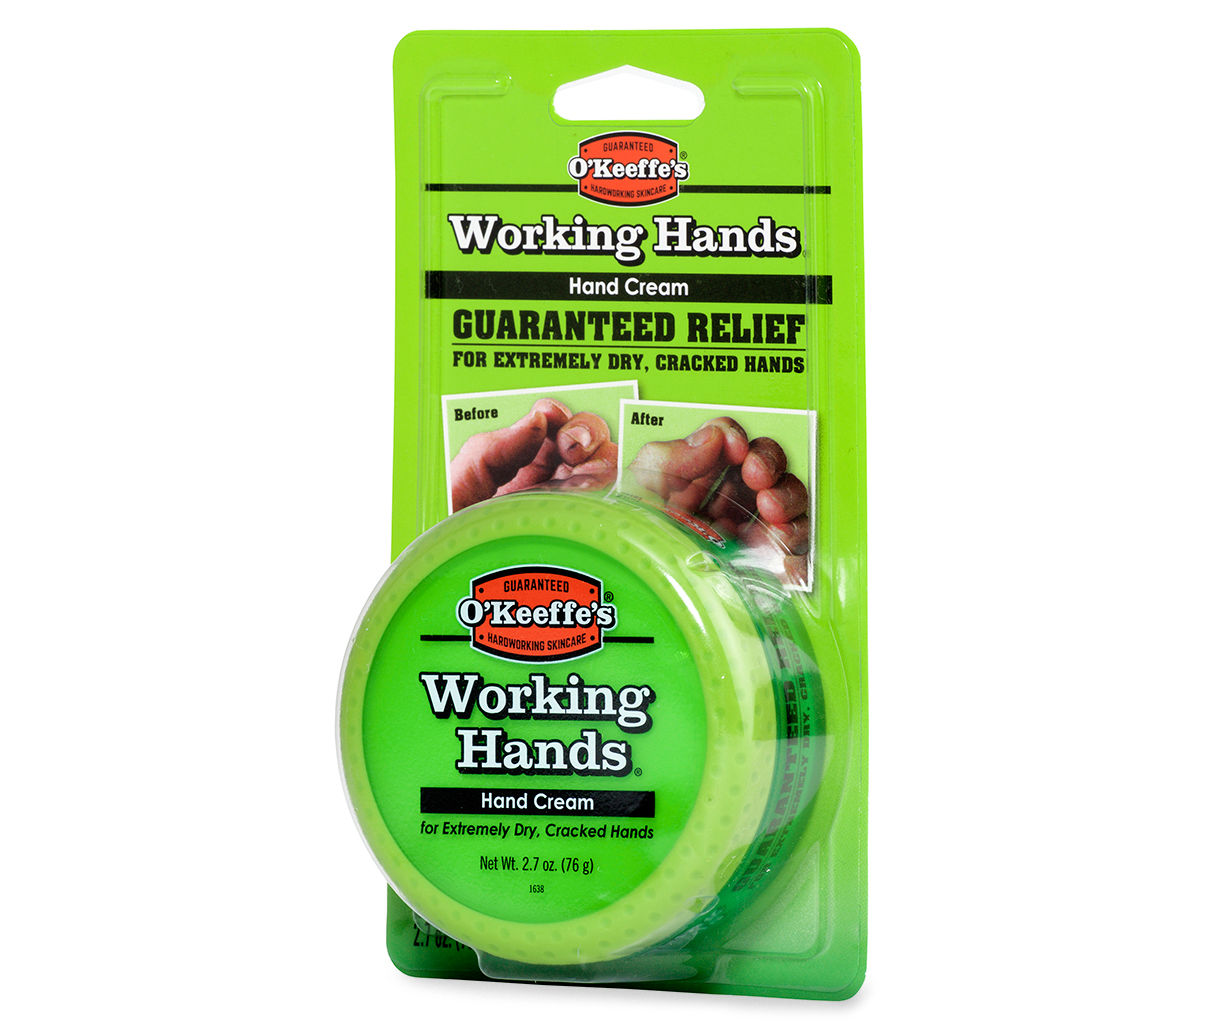 O'Keeffe's Working Hands Hand Cream # The Beer Review Guy 